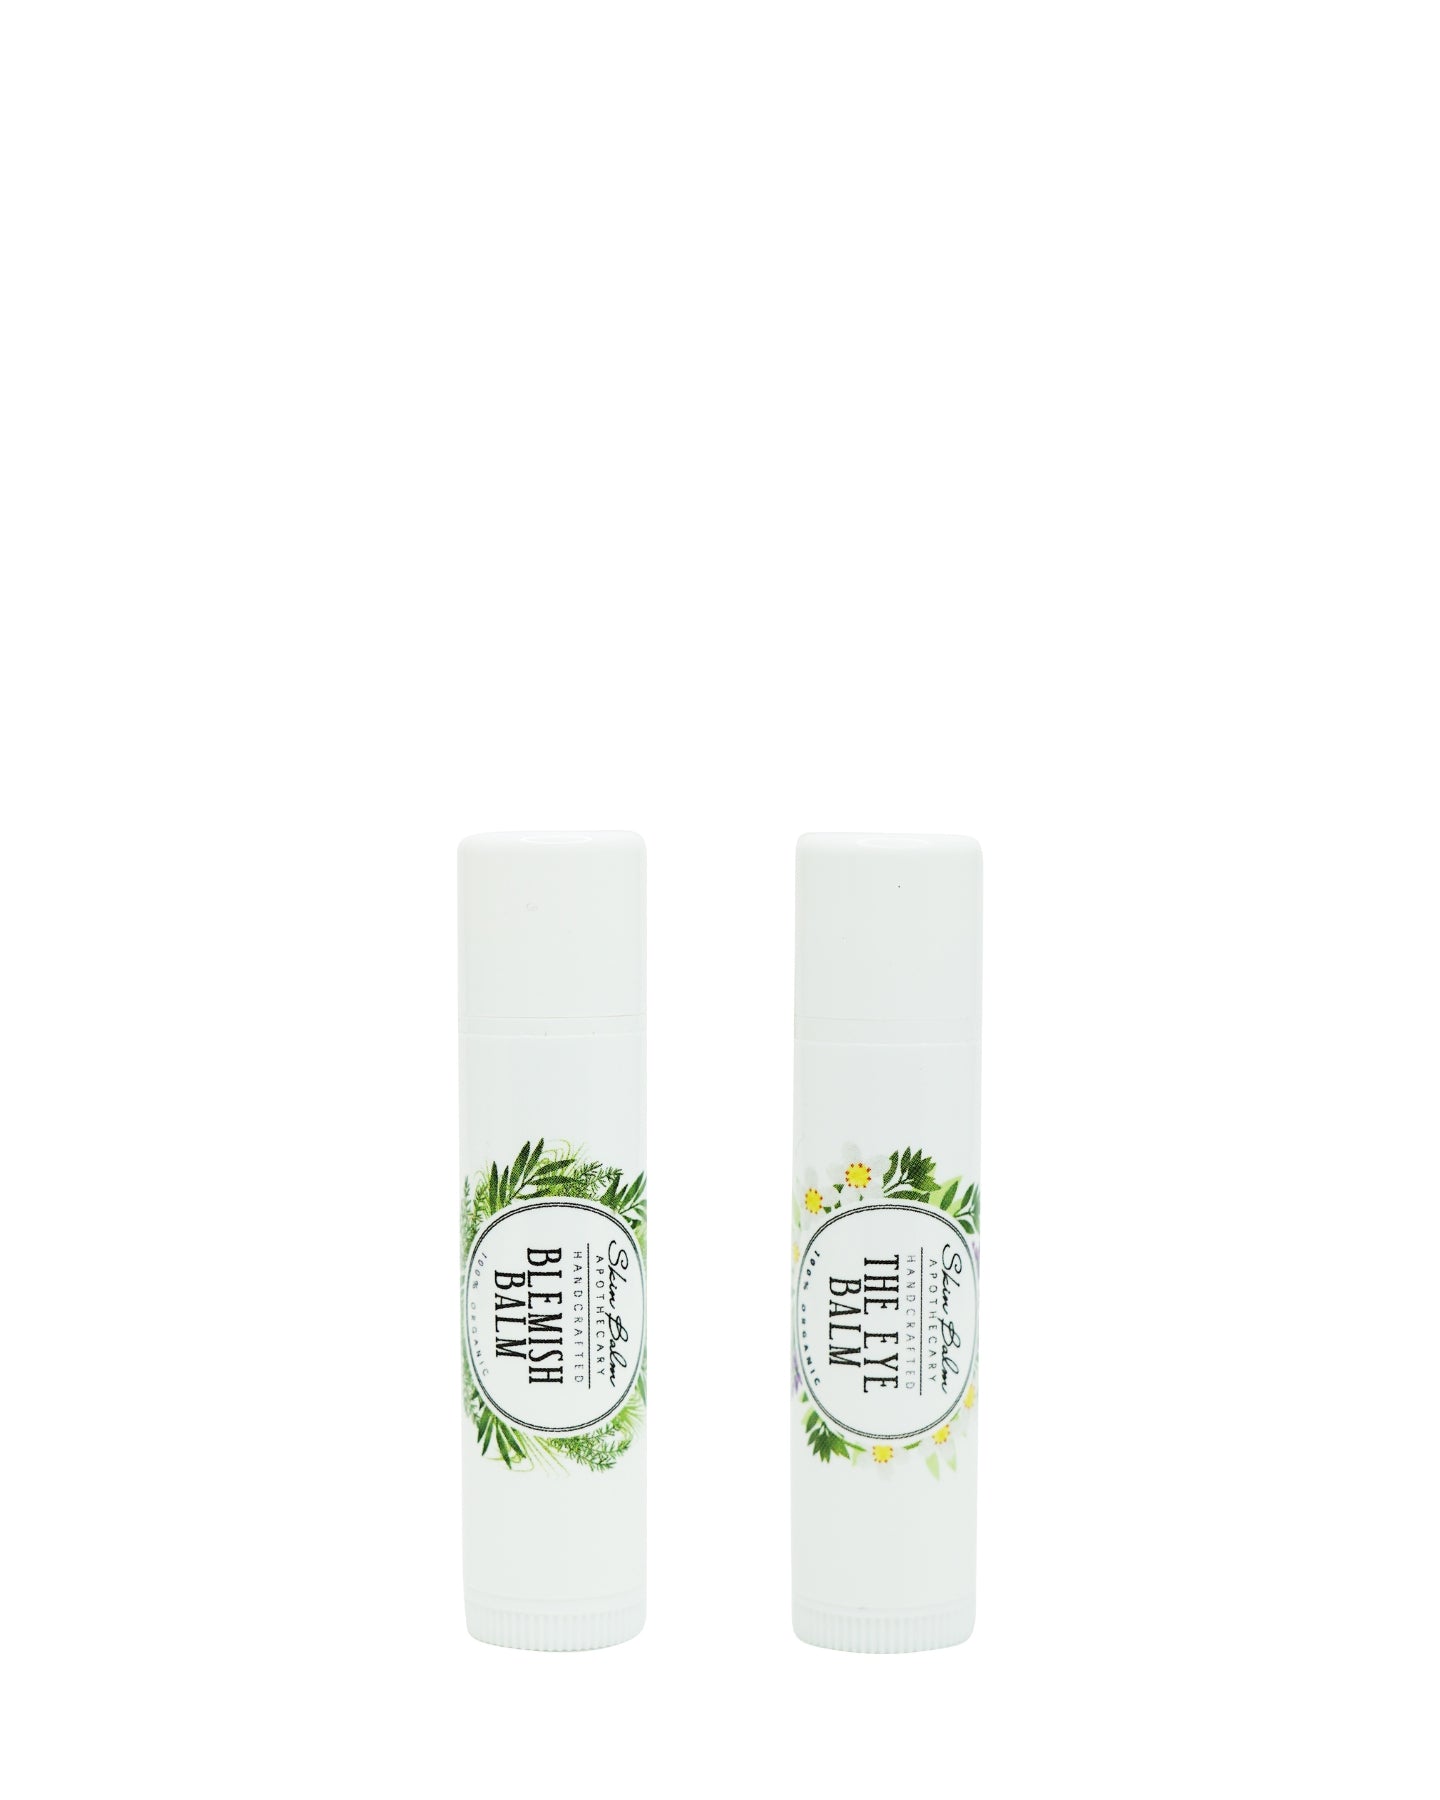 Balm Duo against a white background.